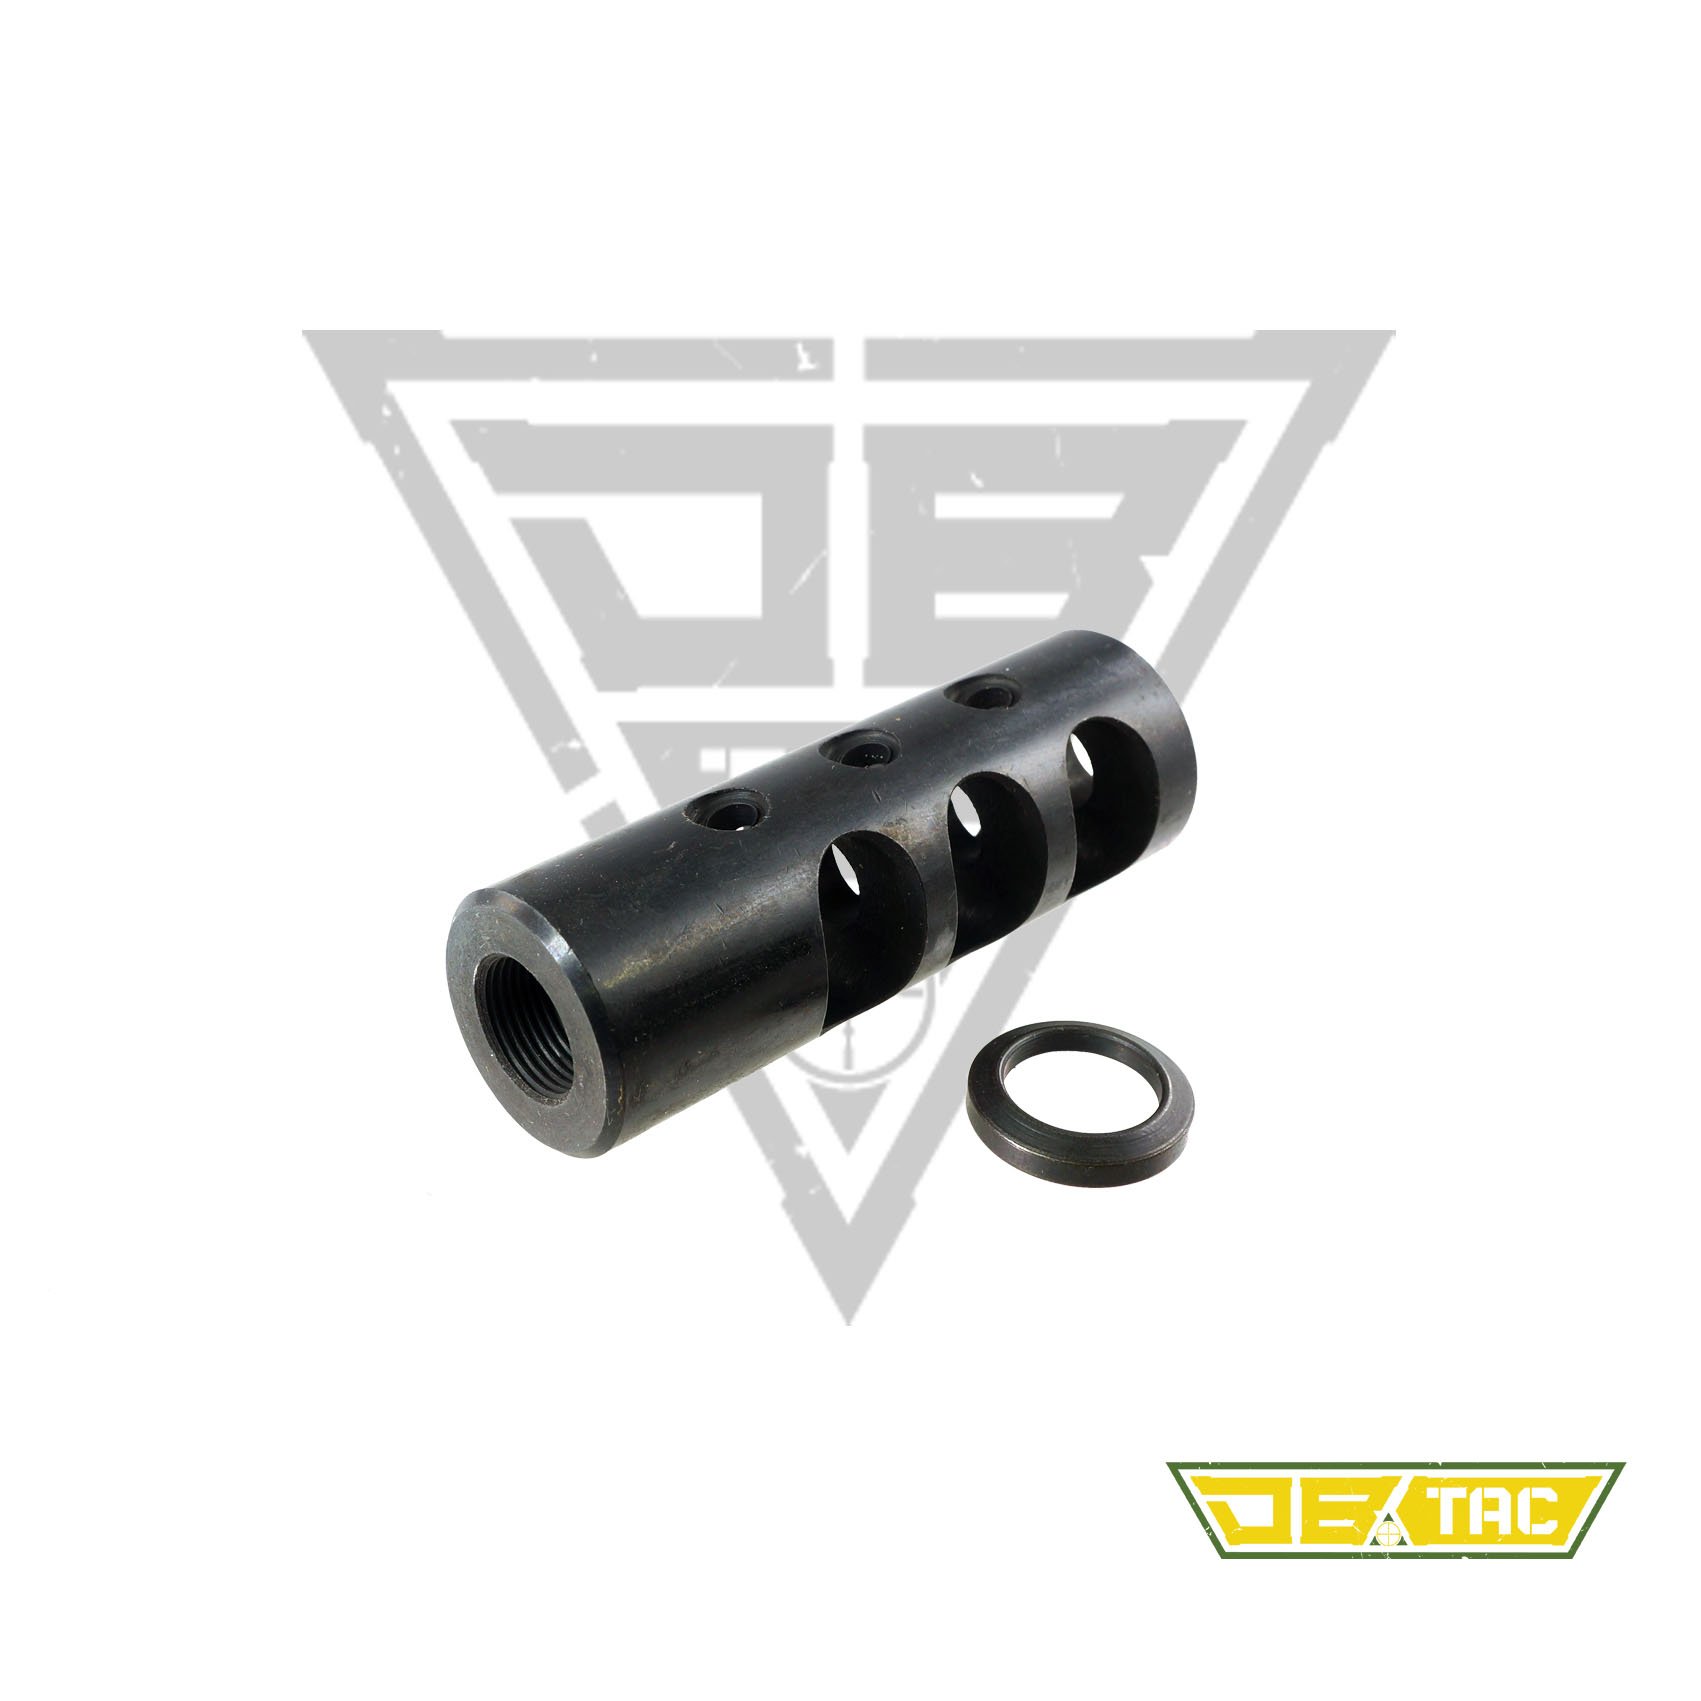 5/8X24 Thread Compact Muzzle Brake For .308+Ruger 1022 Muzzle Brake Adapter 308 